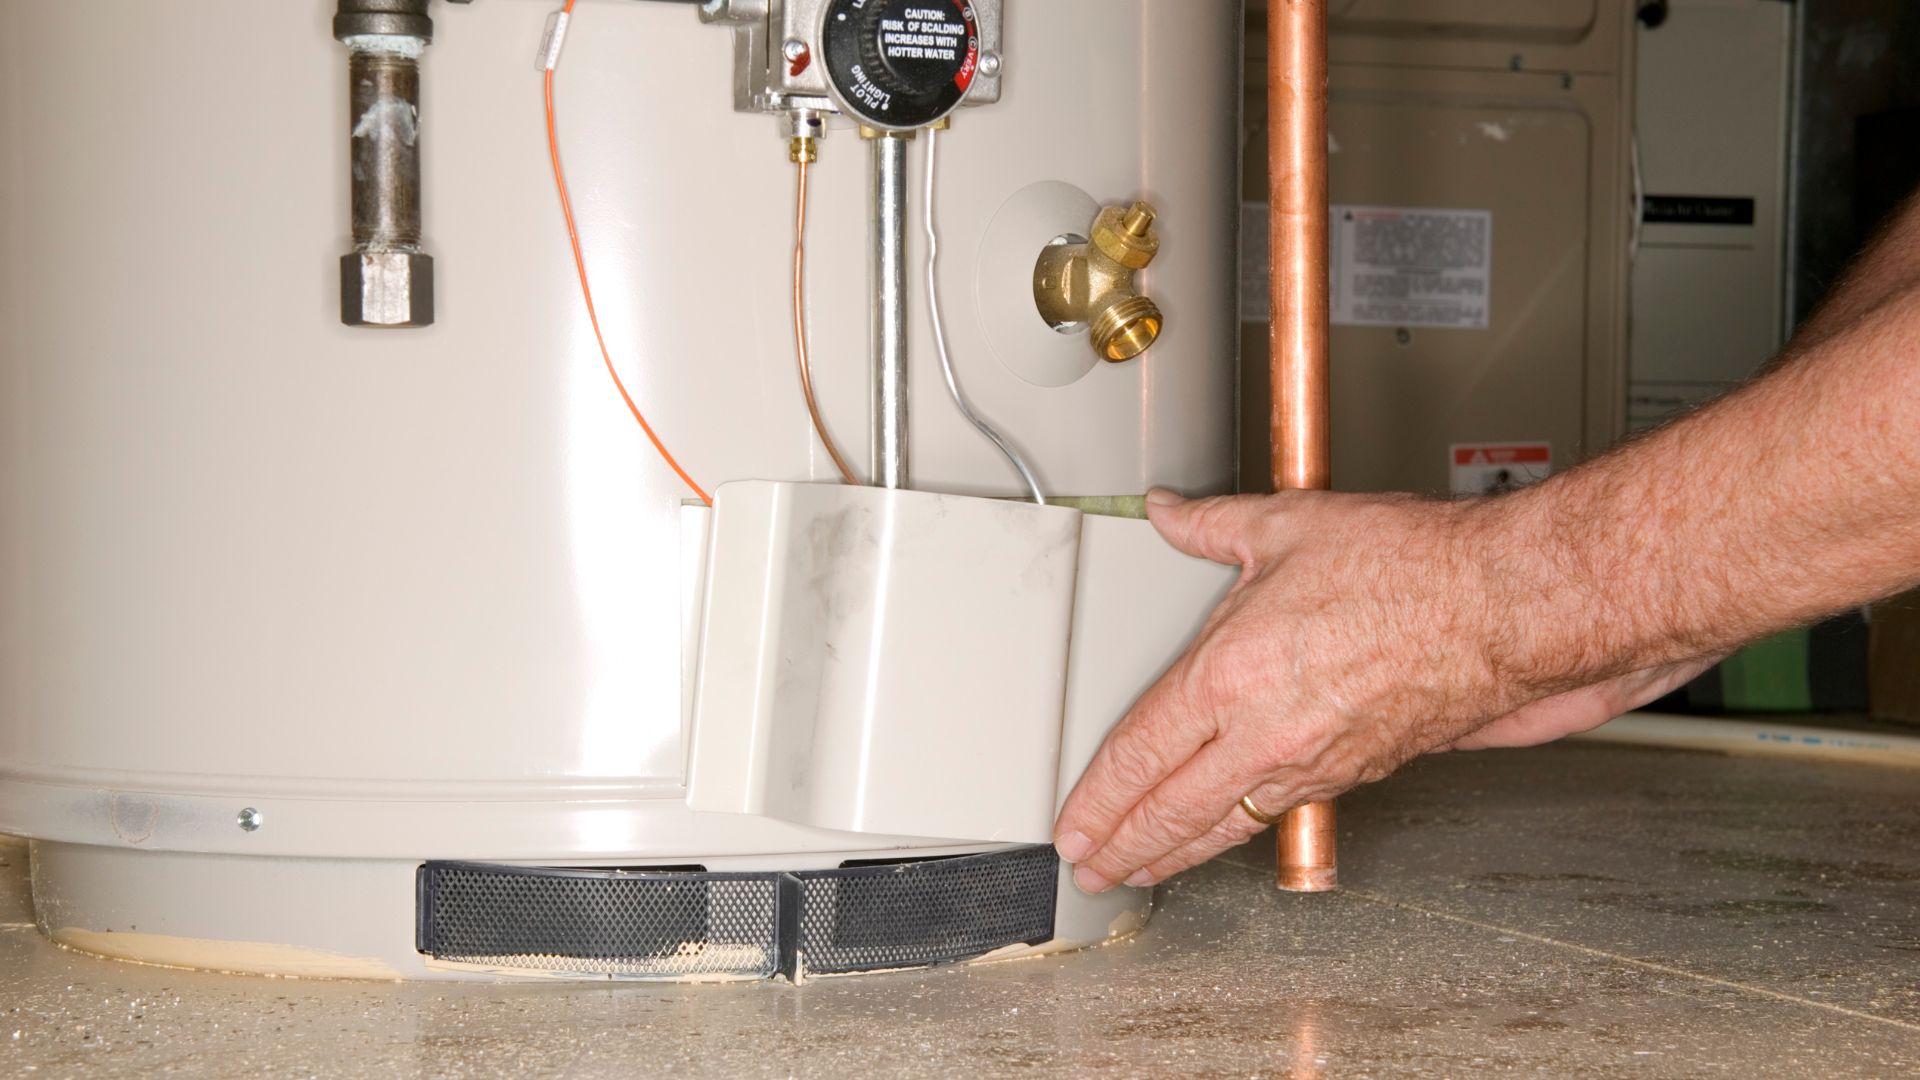 Water Heater Replacement in North Port, Florida with Major League Plumbing